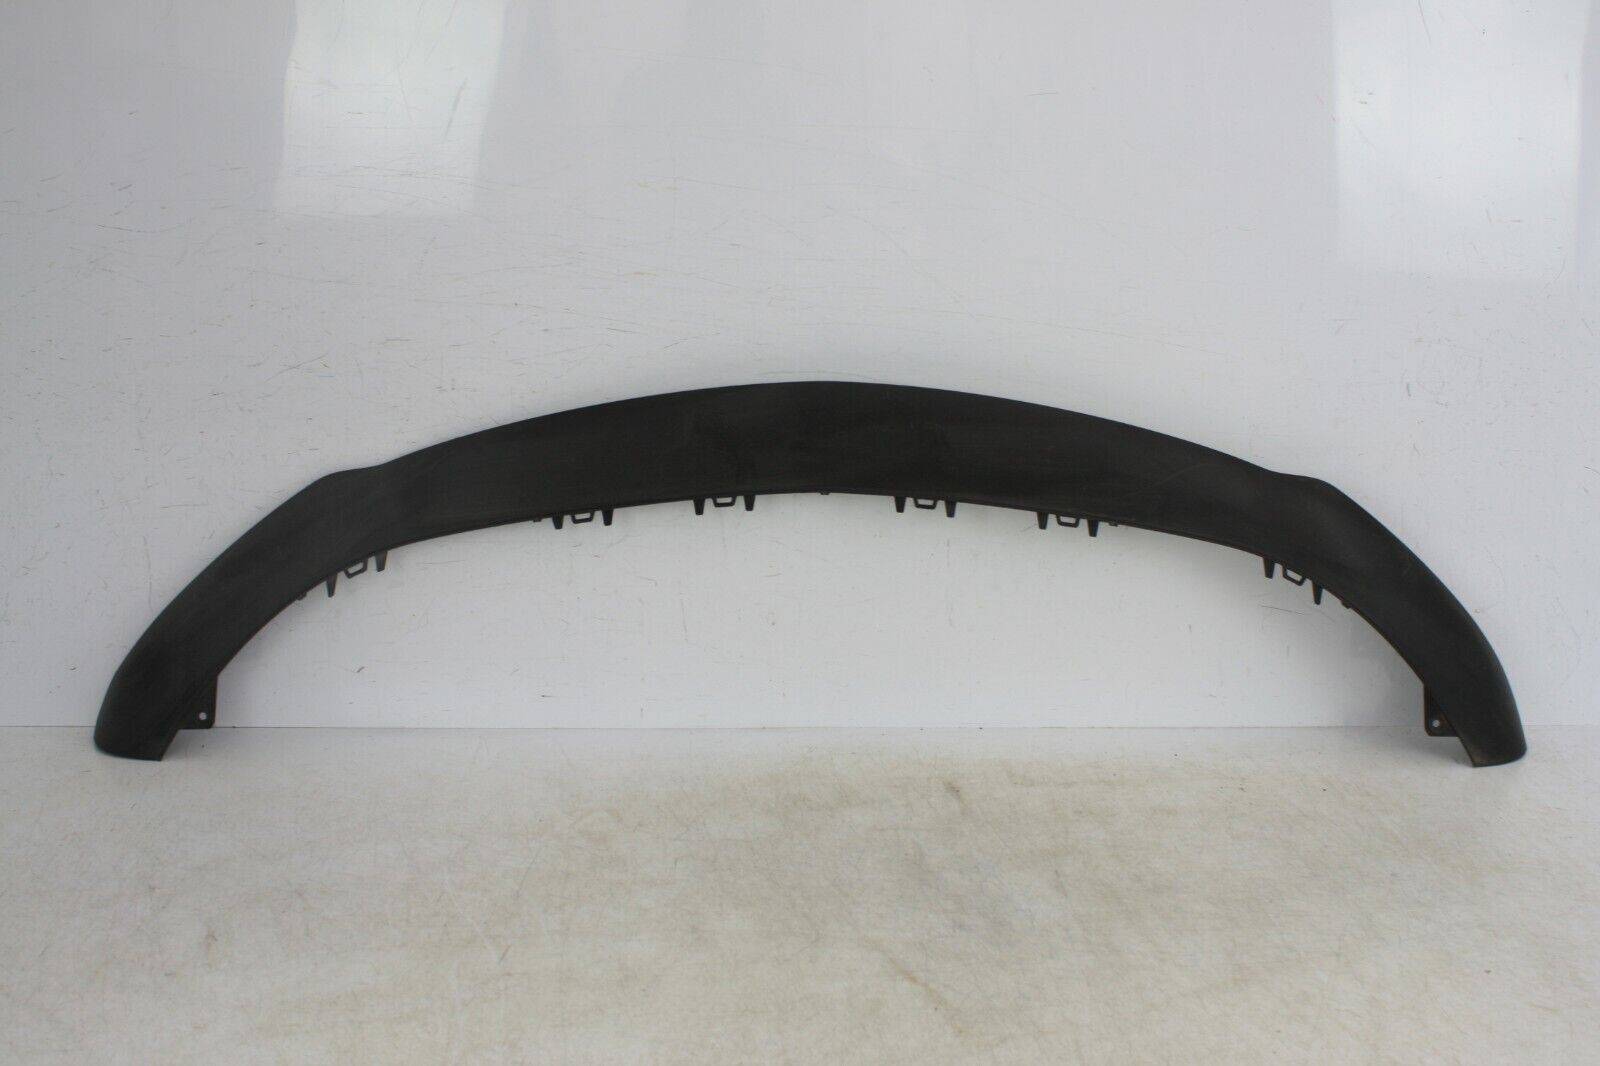 Mercedes EQC N293 AMG Front Bumper Lower Section A2938854401 Genuine 175901767639